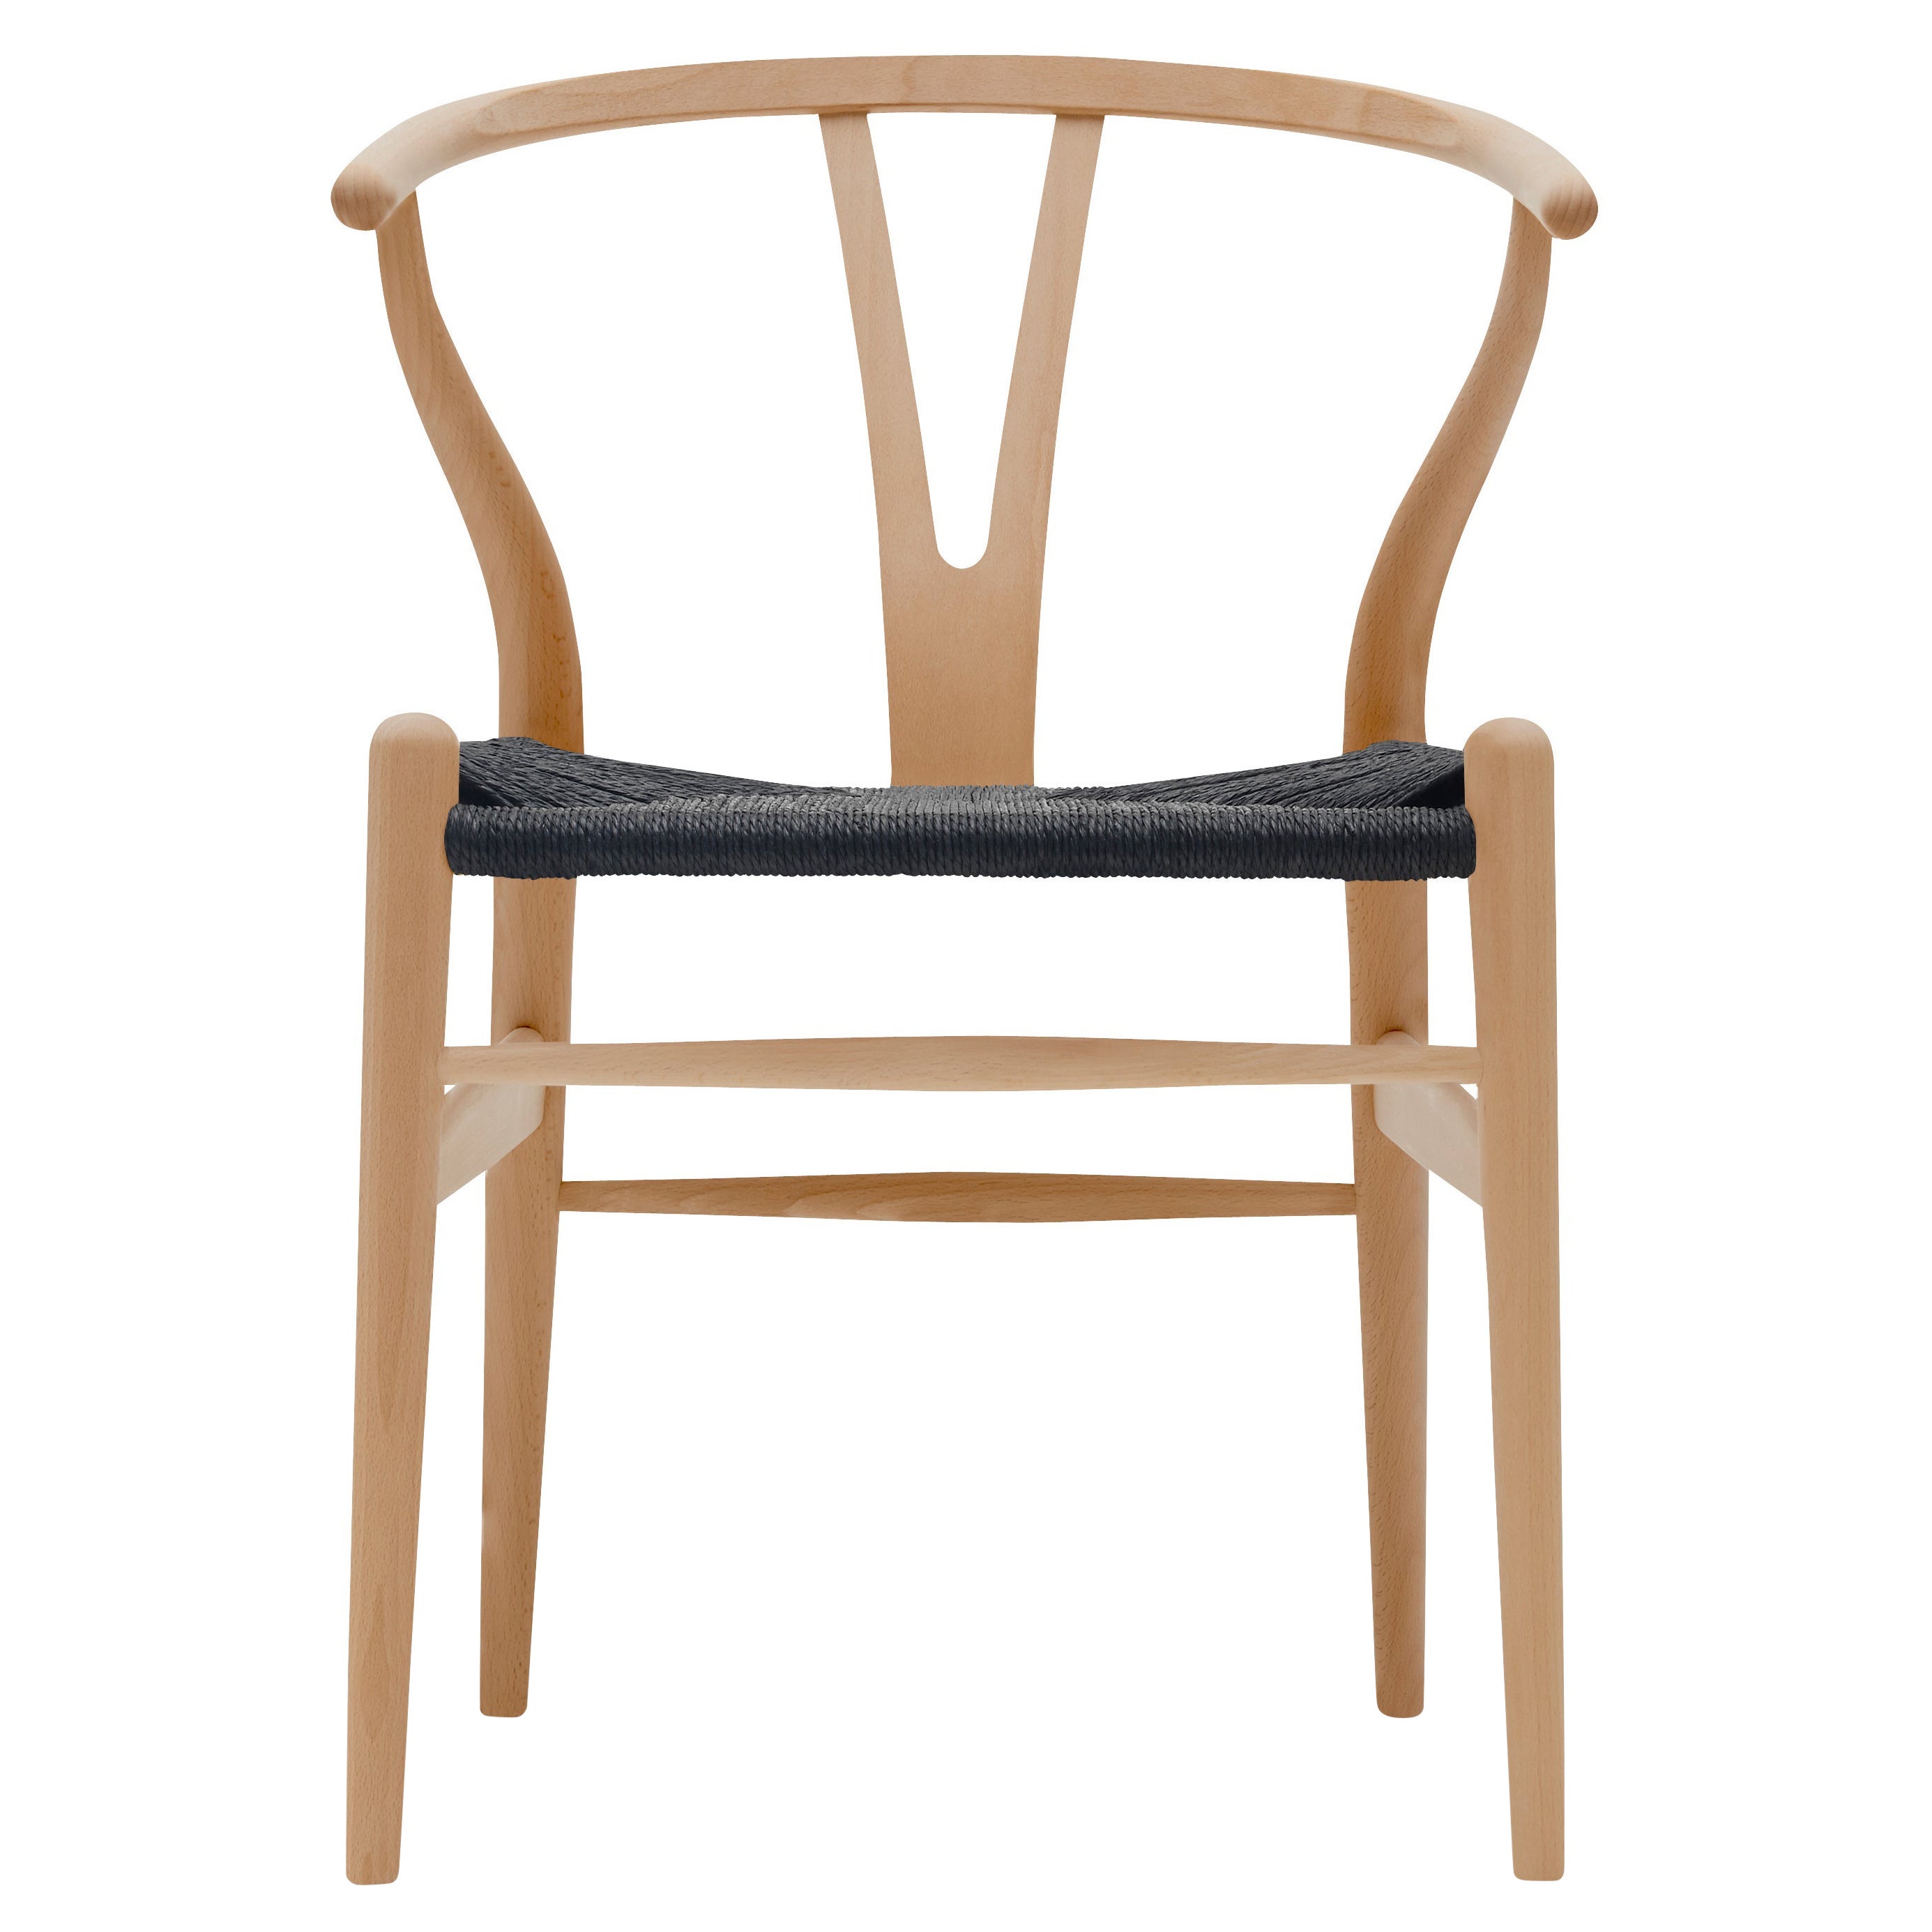 CH24 Wishbone Chair in Beech Lacquer with Black Papercord Seat by Hans J. Wegner